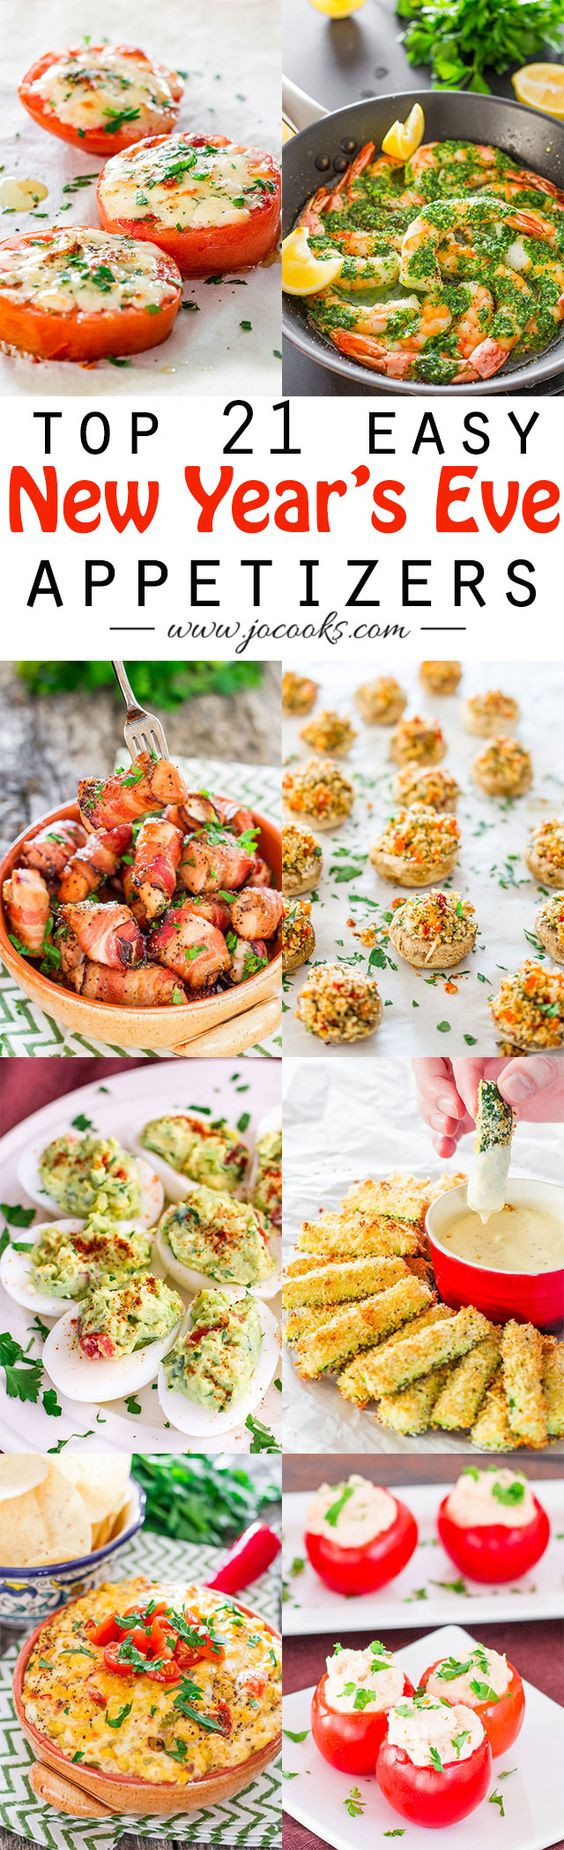 Easy New Years Appetizers
 21 Top Easy New Year s Eve Appetizers